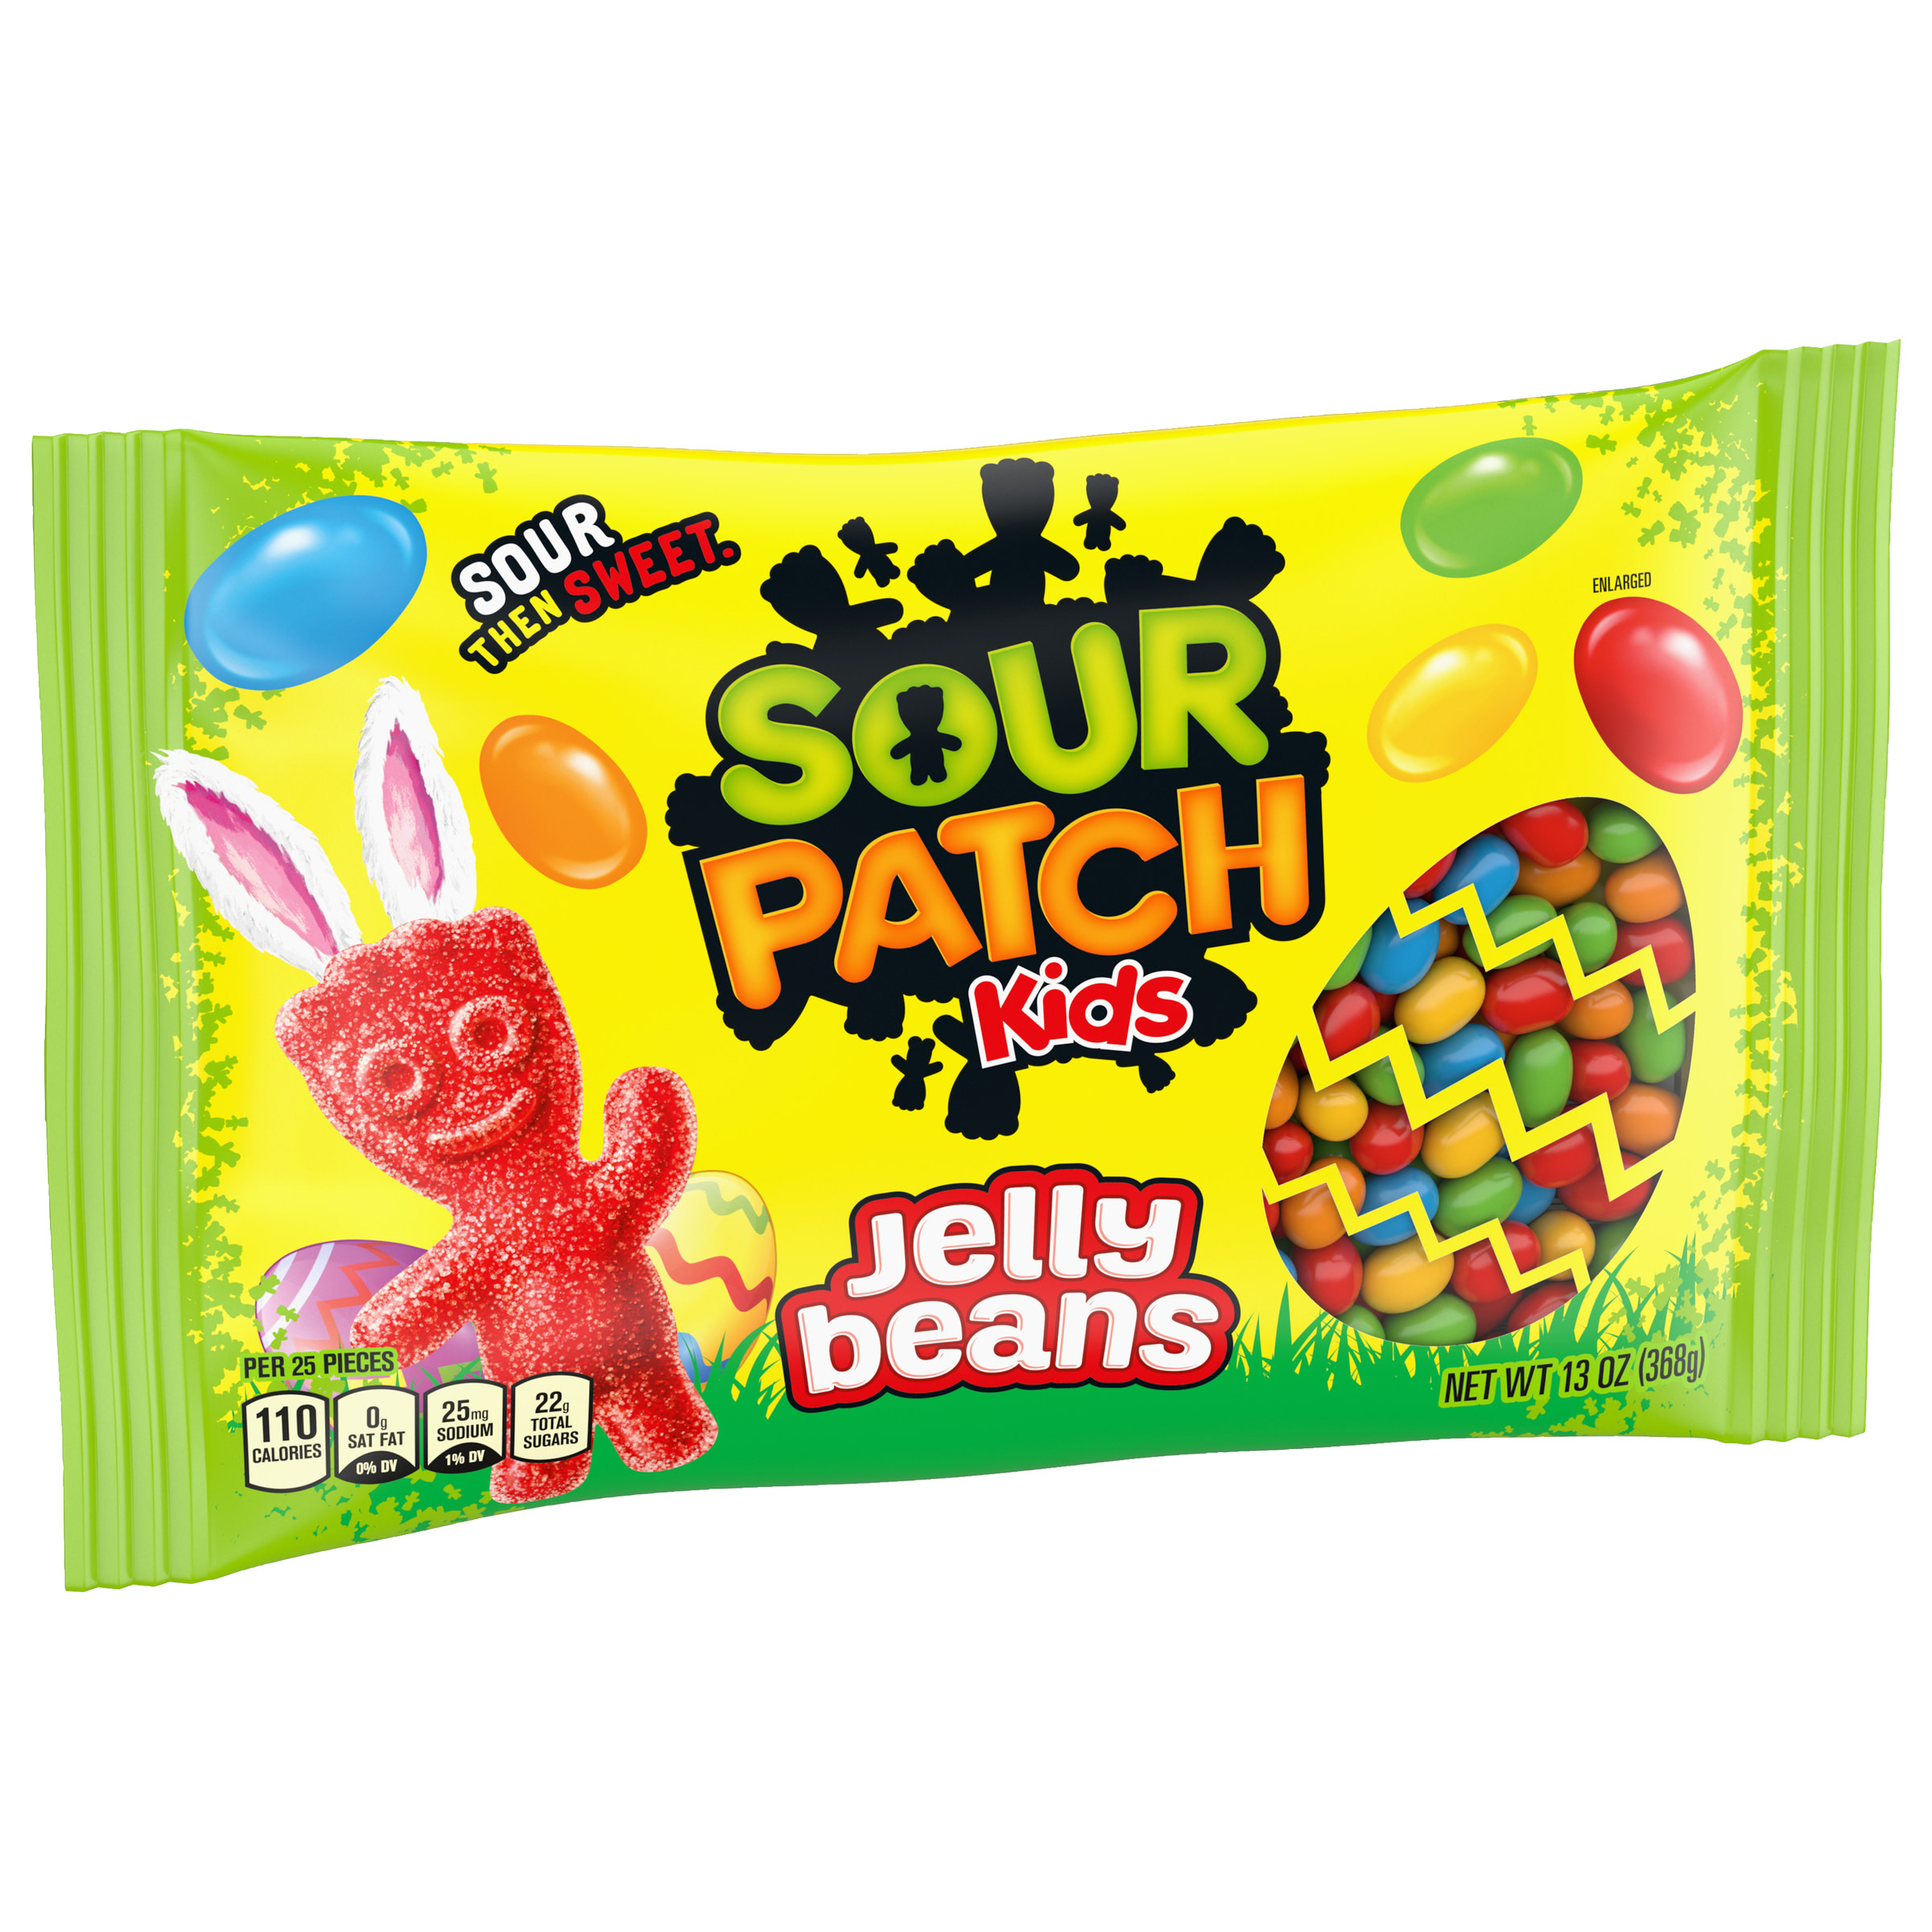 SOUR PATCH KIDS Jelly Beans, Easter Candy, 13 oz - image 2 of 12